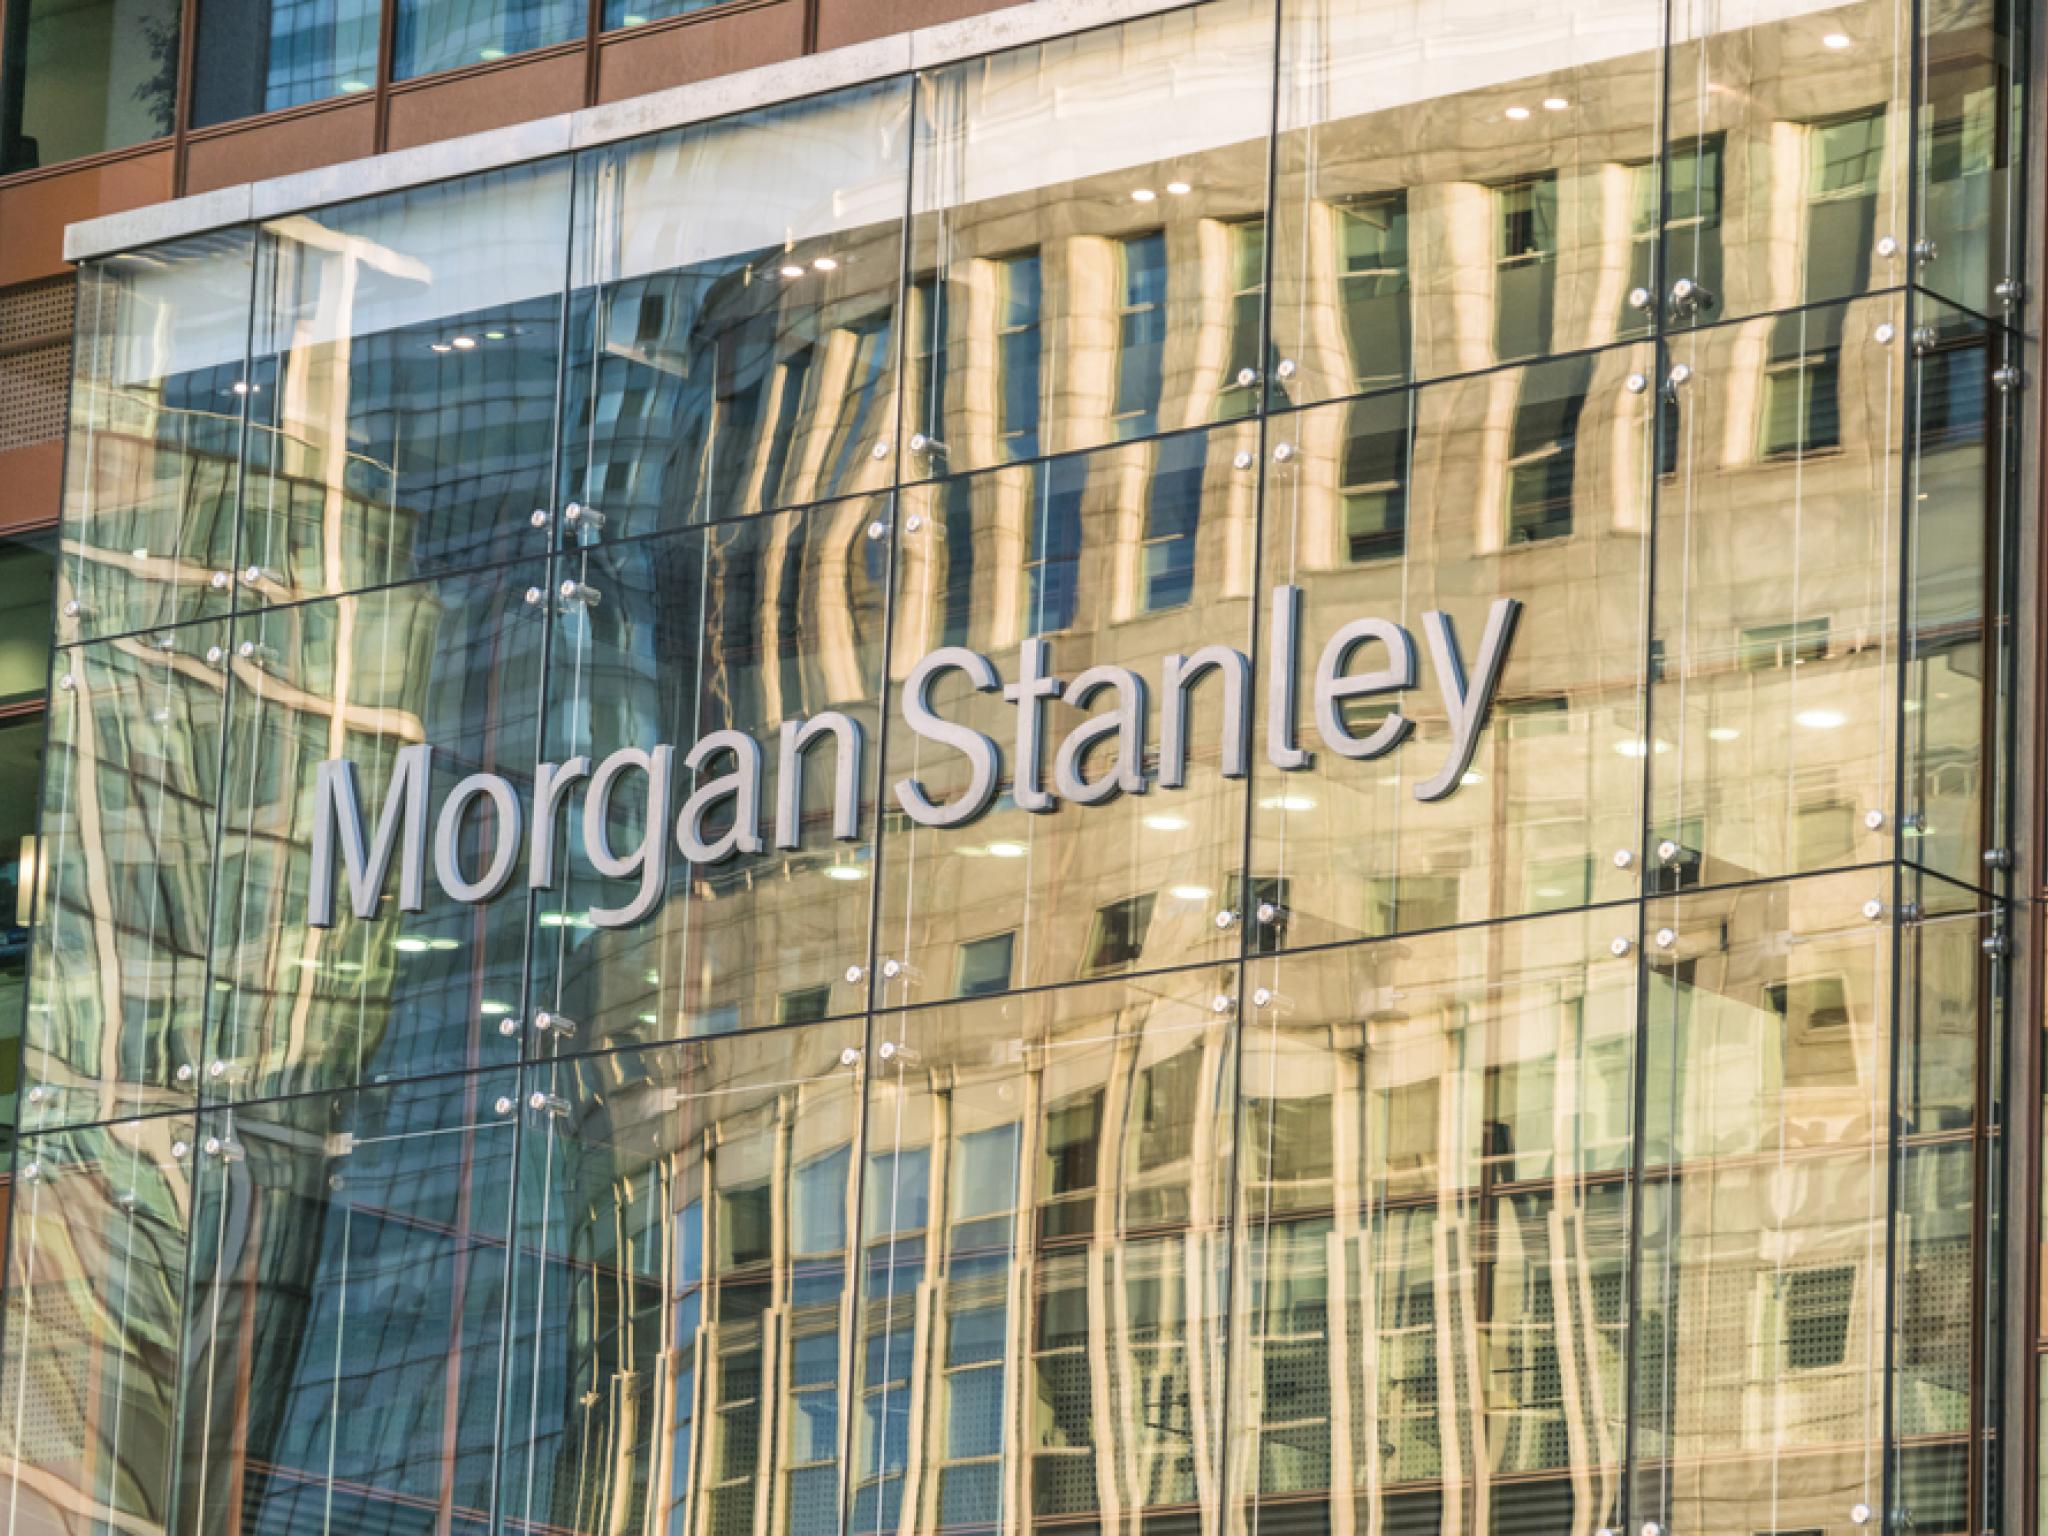  morgan-stanleys-diversified-business-model-drives-q2-success-analyst-projects-increased-shareholder-returns 